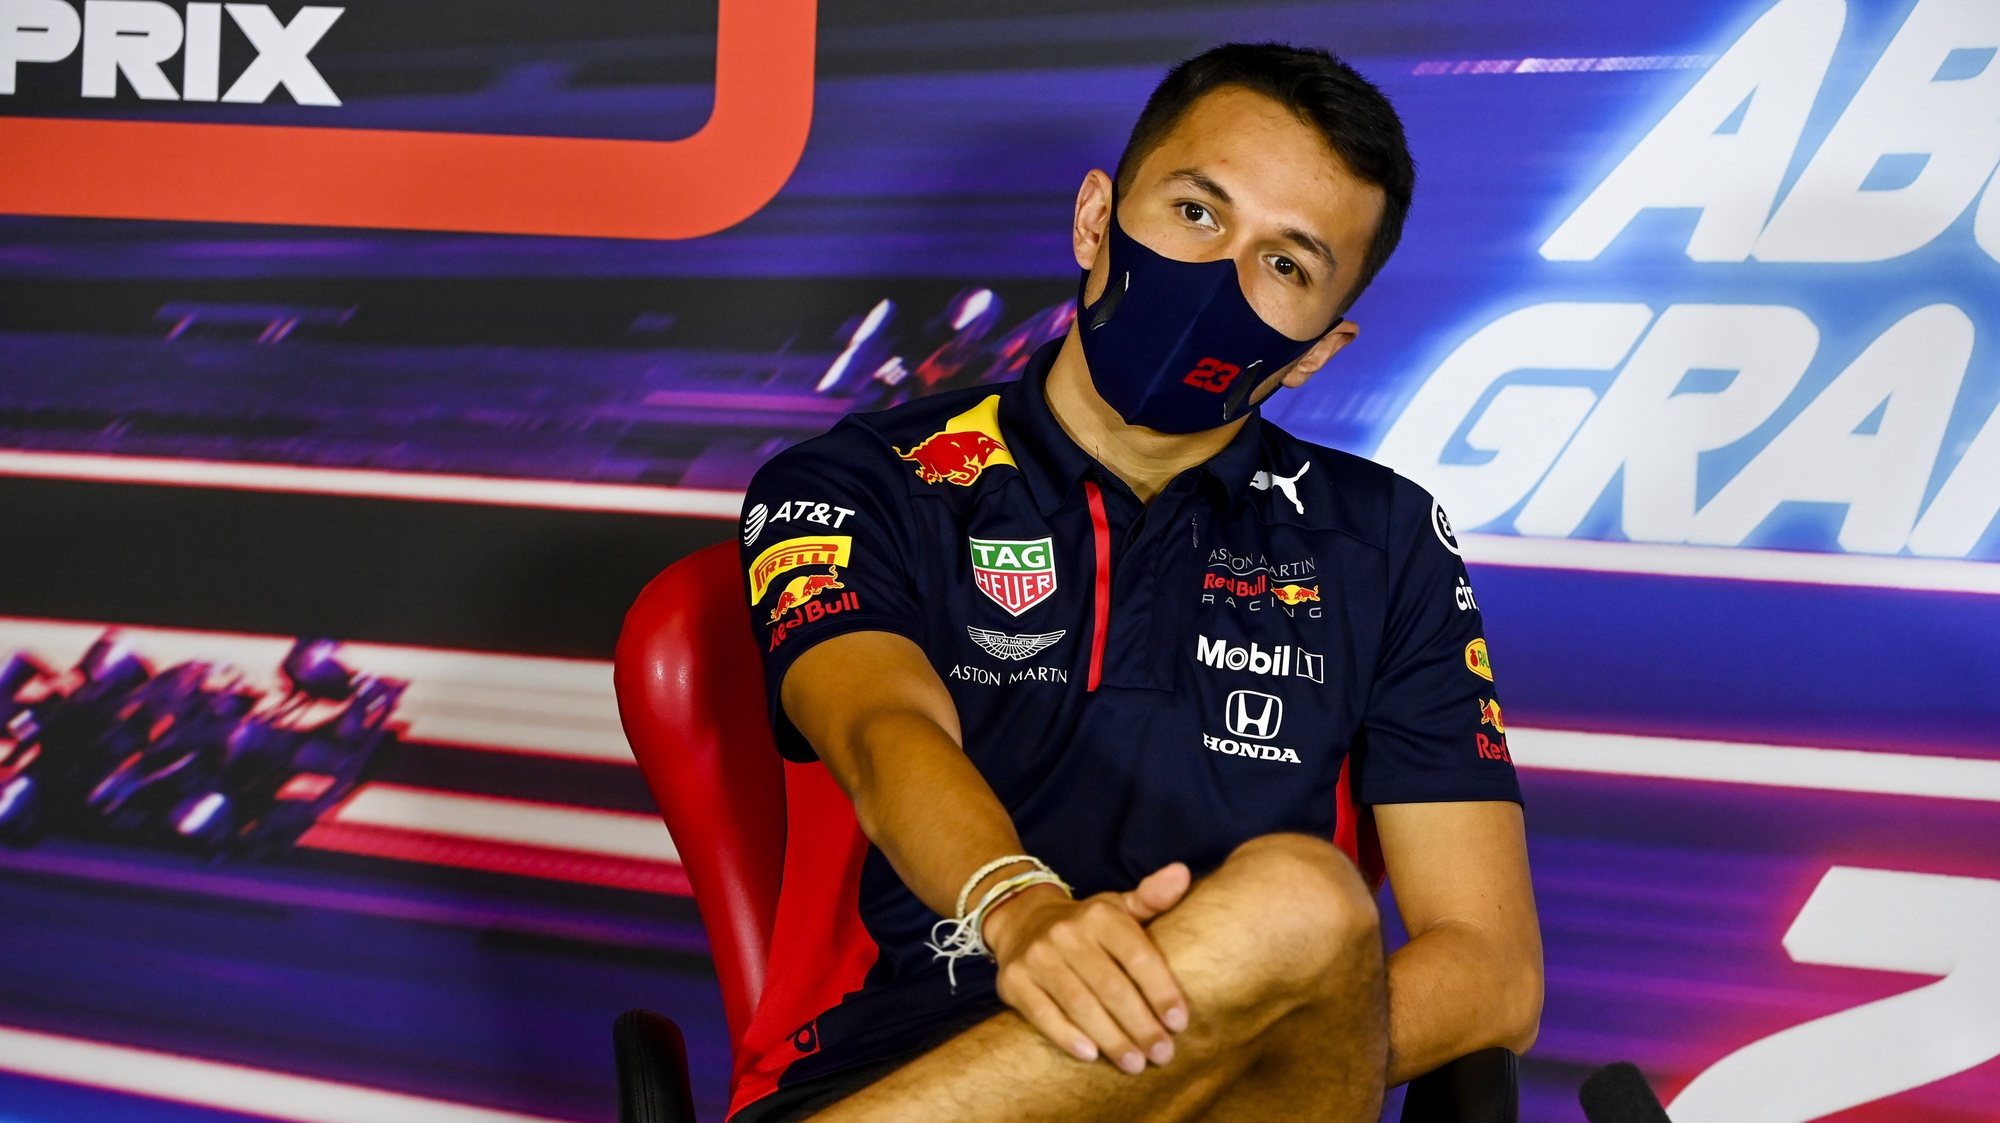 epa08874959 A handout photo made available by the FIA shows Thai Formula One driver Alexander Albon of Aston Martin Red Bull Racing wearing a protective face mask during a press conference ahead of the Formula One Grand Prix of Abu Dhabi at Yas Marina Circuit in Abu Dhabi, United Arab Emirates, 10 December 2020. The Formula One Grand Prix of Abu Dhabi will take place on 13 December 2020.  EPA/FIA/F1 HANDOUT  HANDOUT EDITORIAL USE ONLY/NO SALES *** Local Caption *** BAHRAIN, BAHRAIN - NOVEMBER 26: &lt;&lt;enter caption here&gt;&gt; during previews ahead of the F1 Grand Prix of Bahrain at Bahrain International Circuit on November 26, 2020 in Bahrain, Bahrain. (Photo by Rudy Carezzevoli/Getty Images)